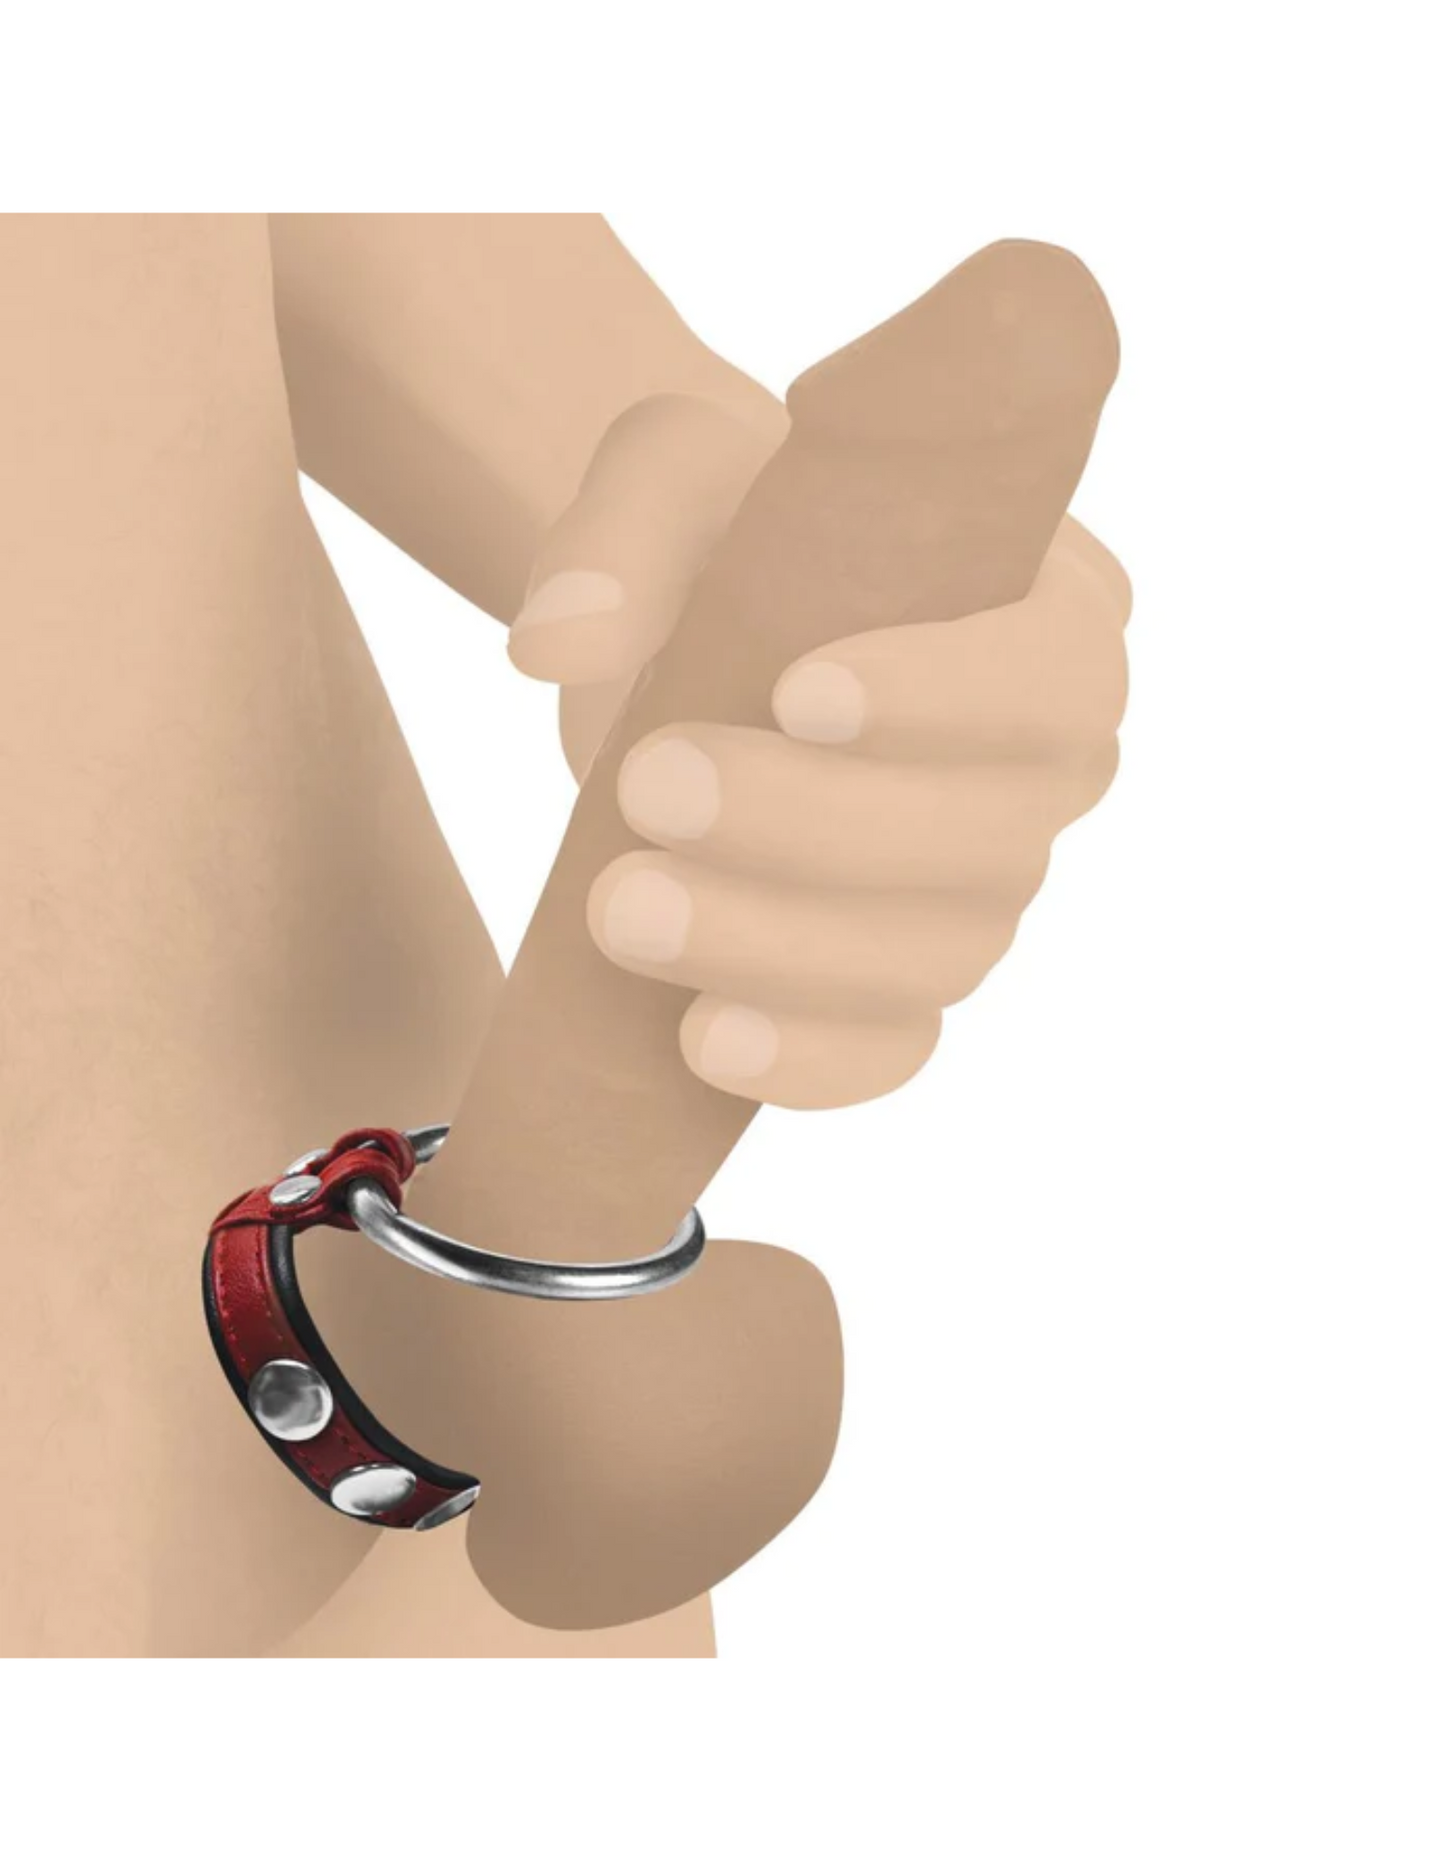 Illustration of the Strict Cock Gear Leather and Steel Cock and Ball Ring by XR Brands and how to wear it on one's penis and testicles.